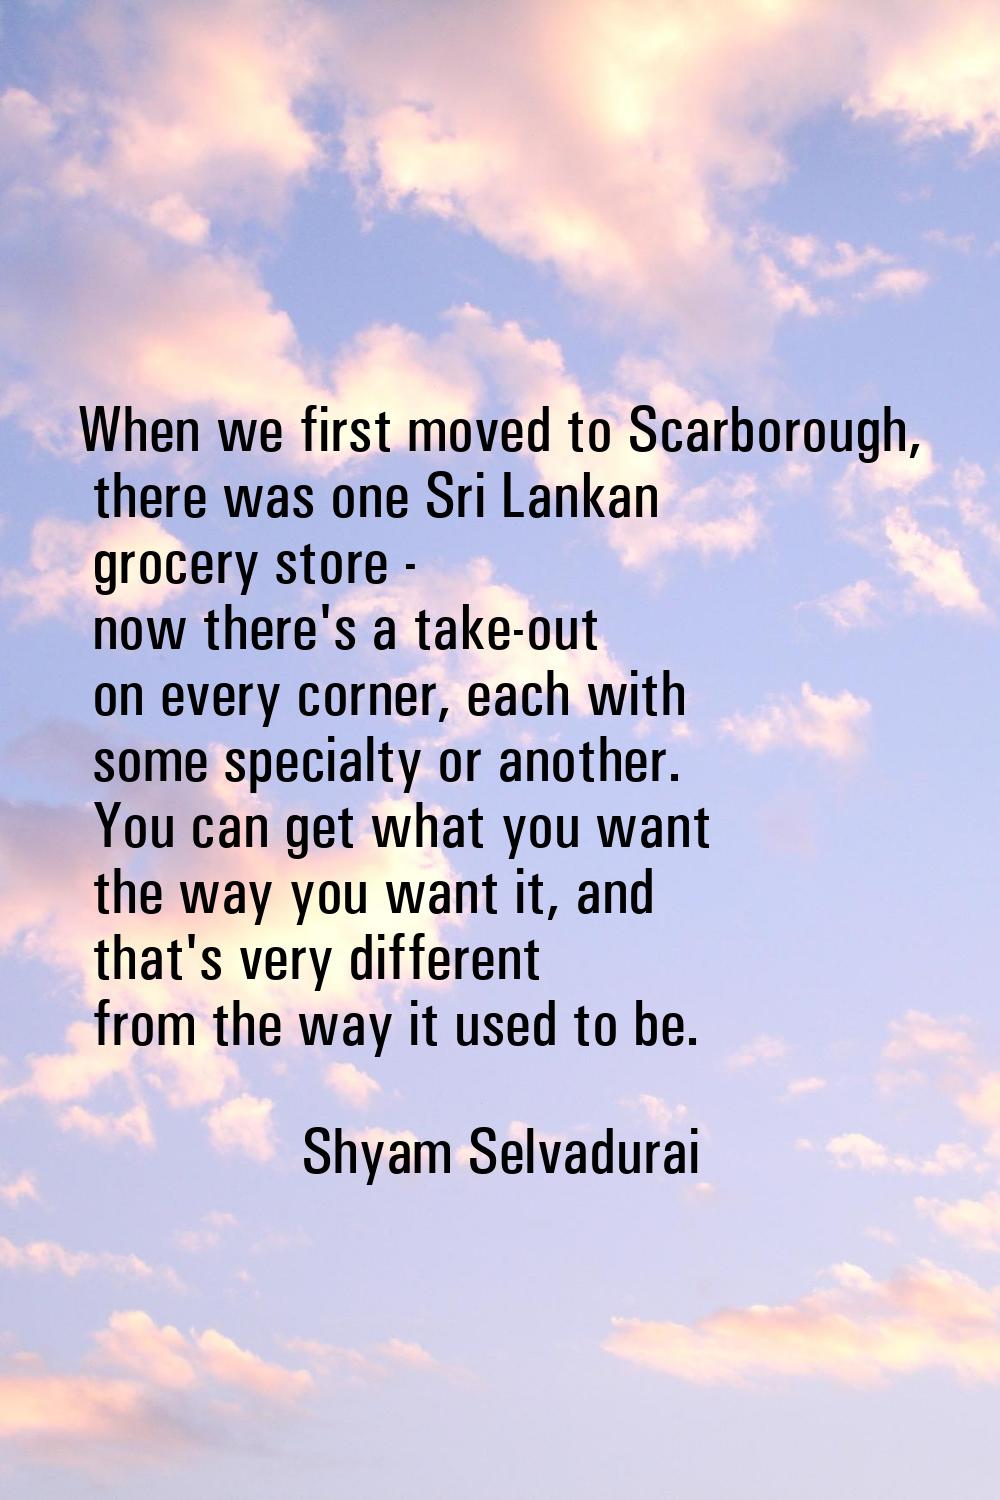 When we first moved to Scarborough, there was one Sri Lankan grocery store - now there's a take-out